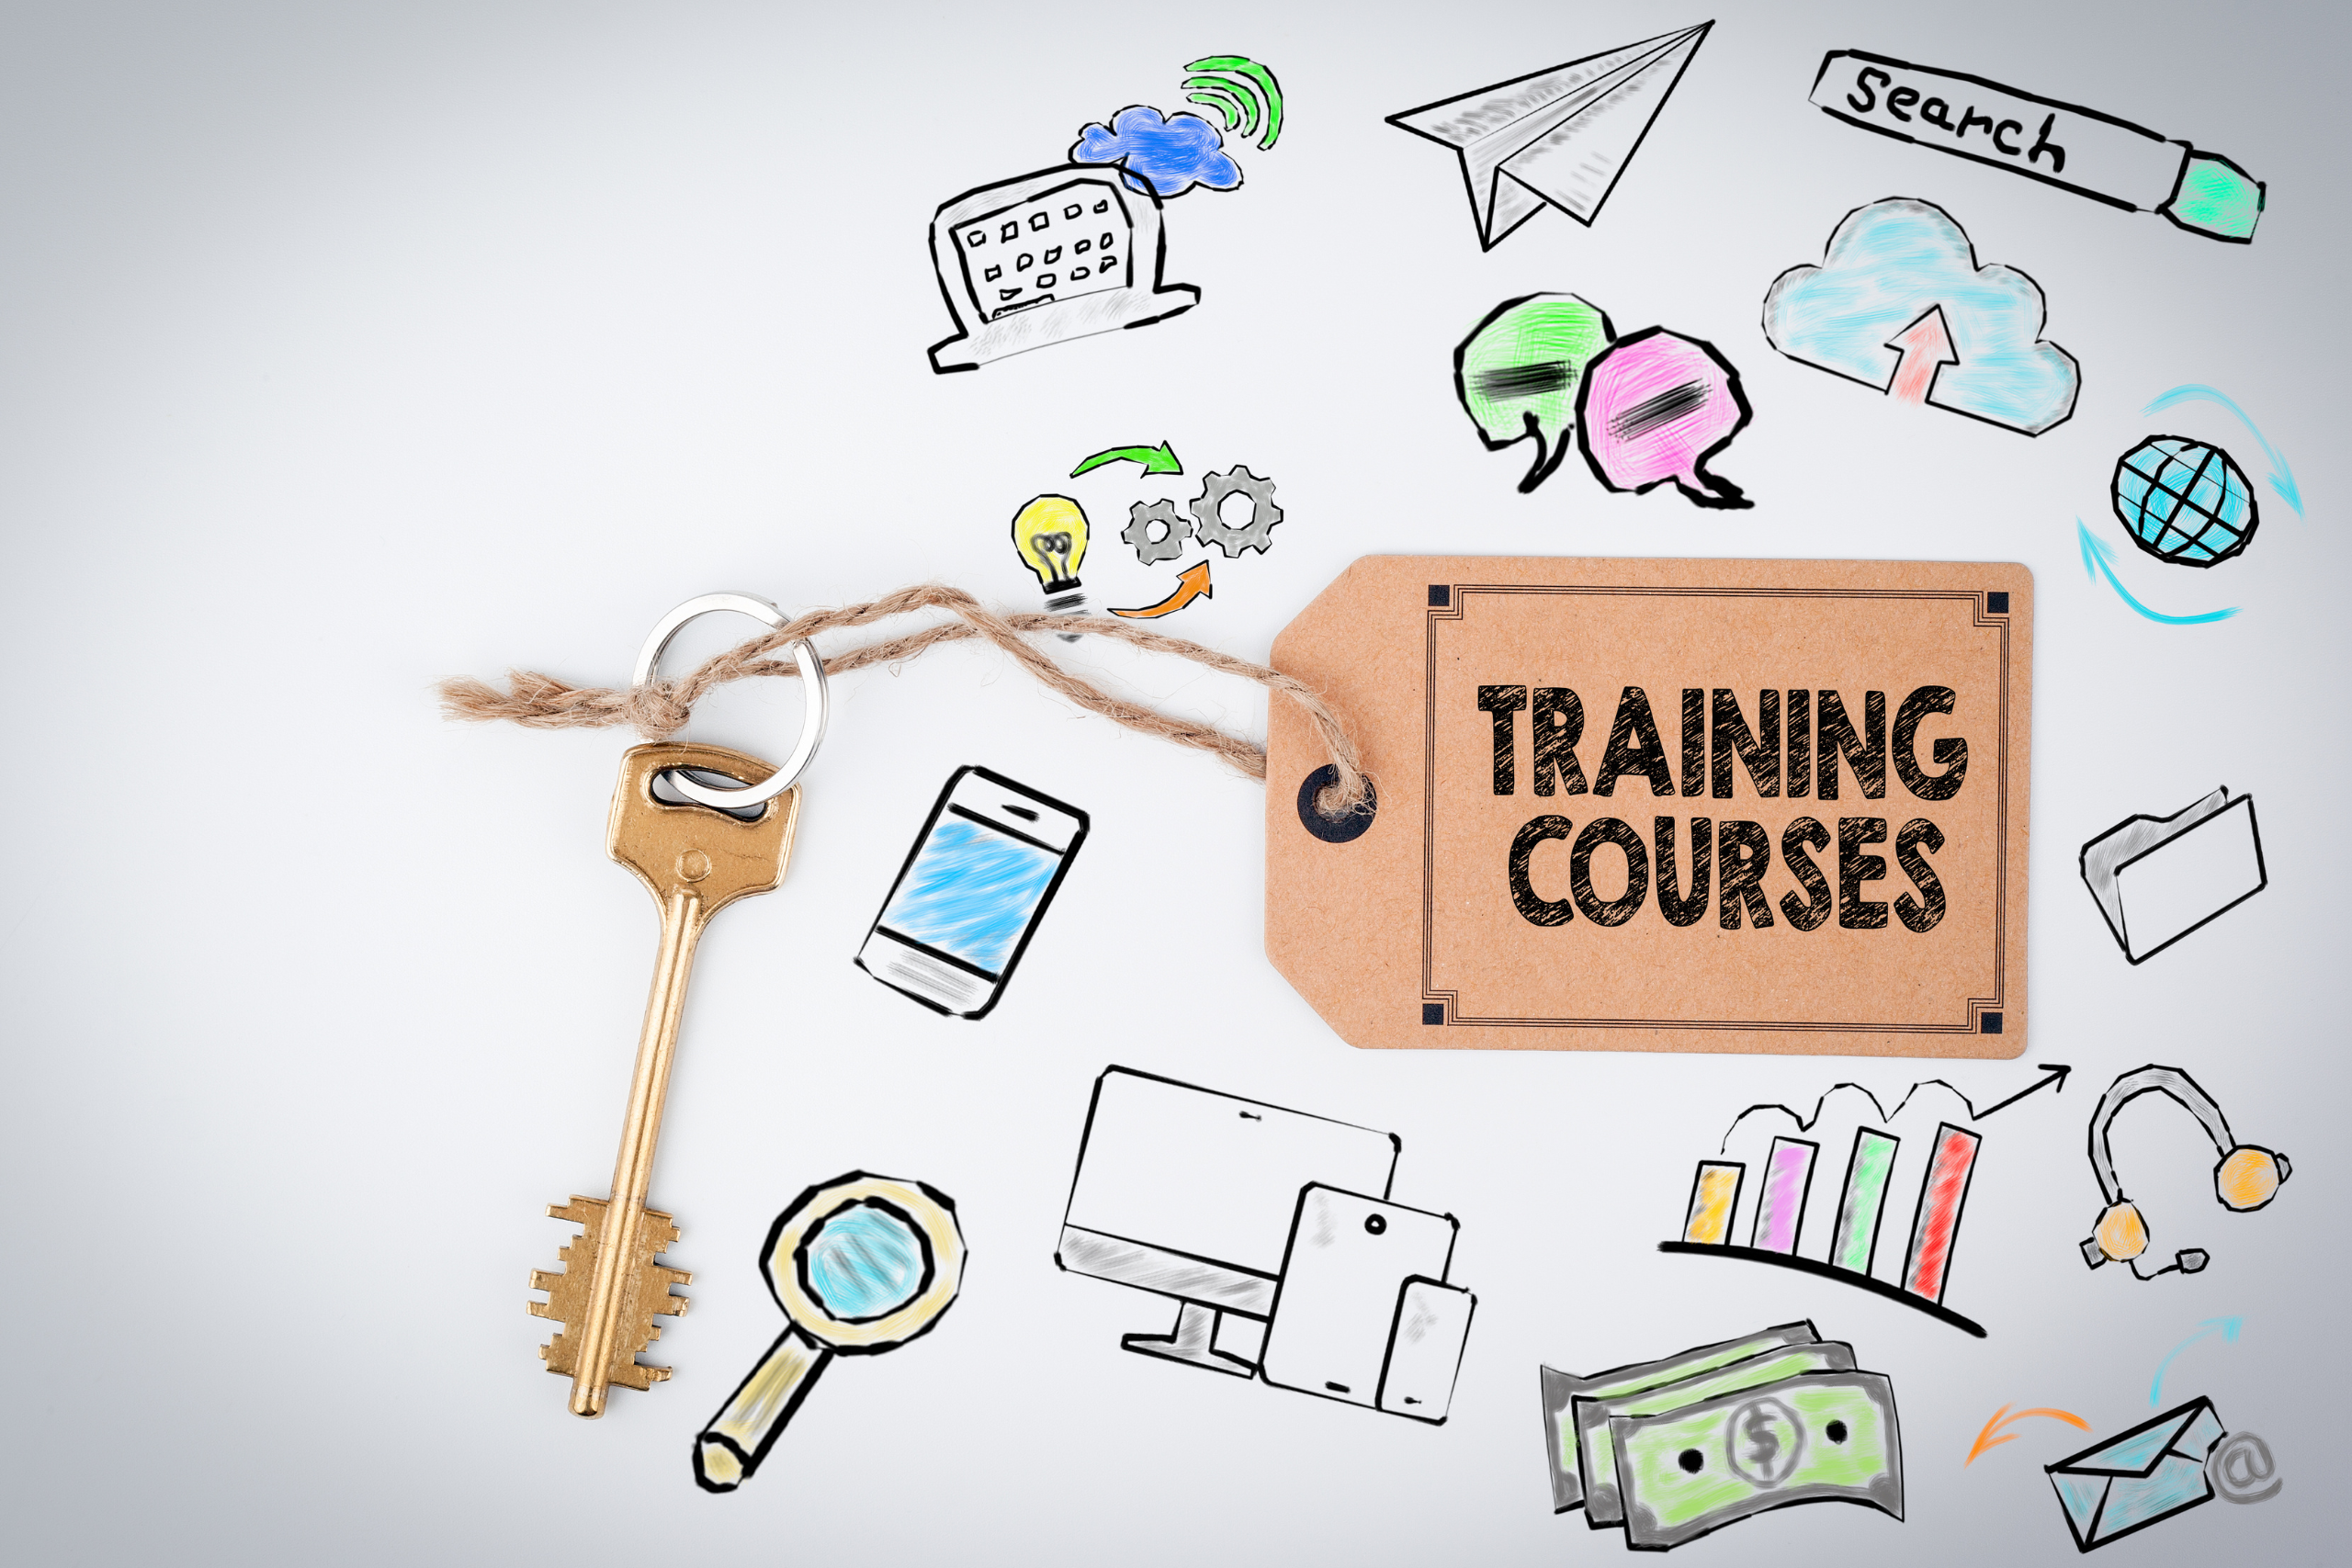 Training and courses